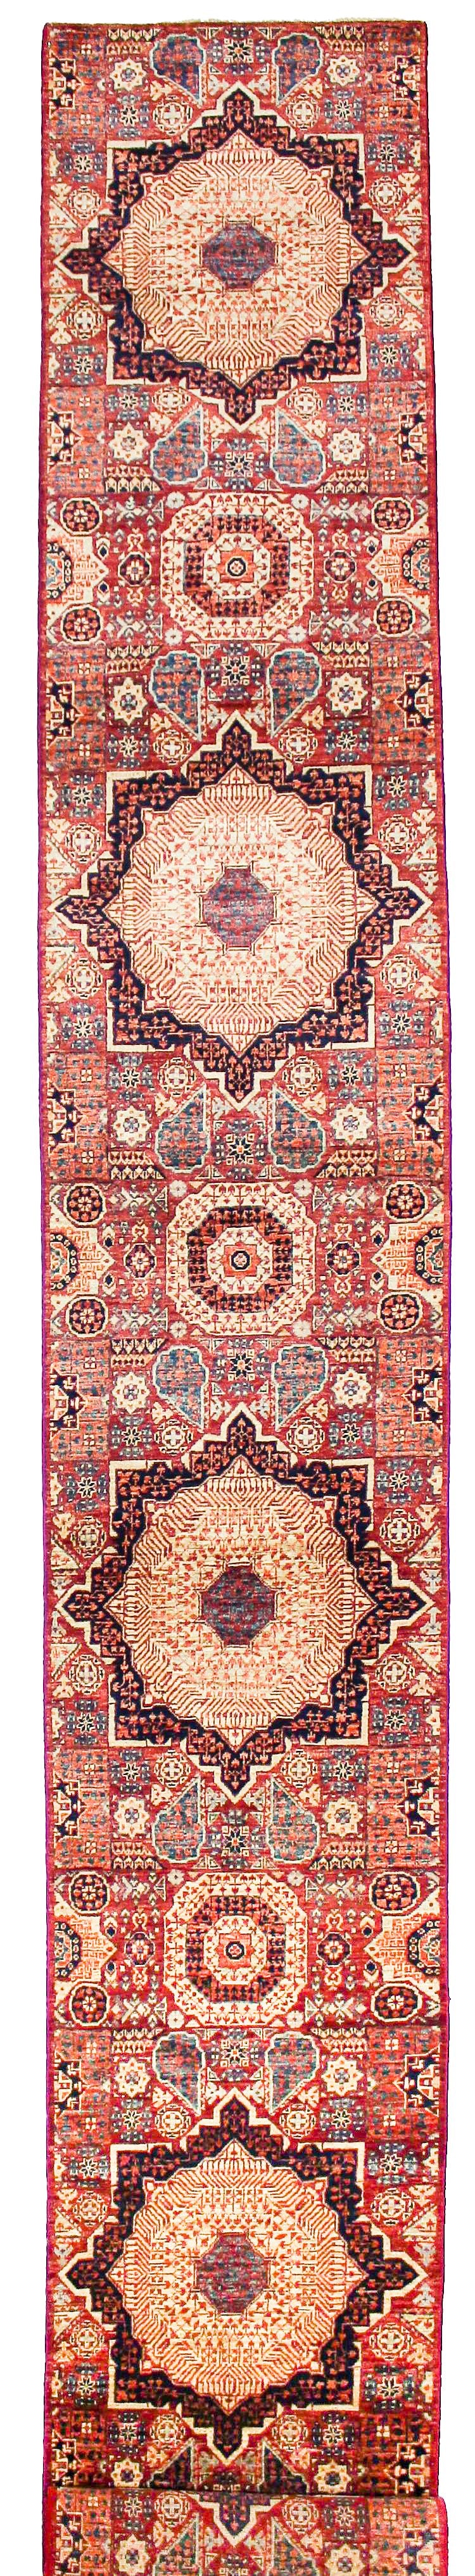 2x20 Red and Beige Turkish Tribal Runner